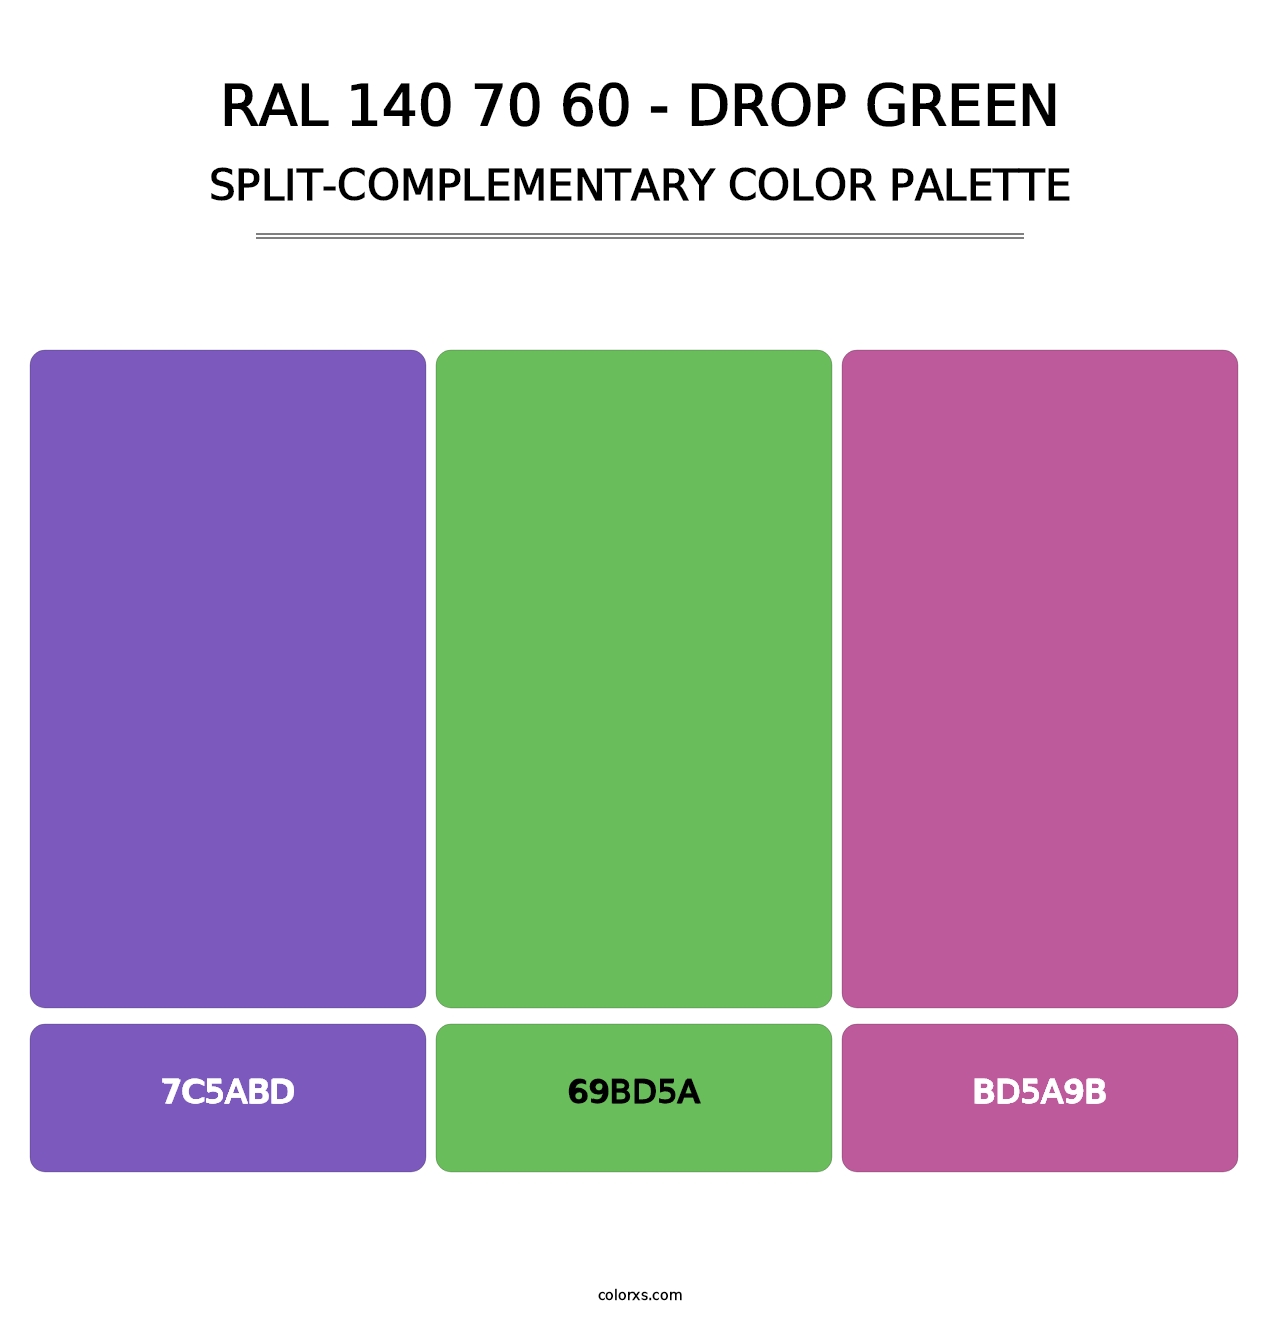 RAL 140 70 60 - Drop Green - Split-Complementary Color Palette